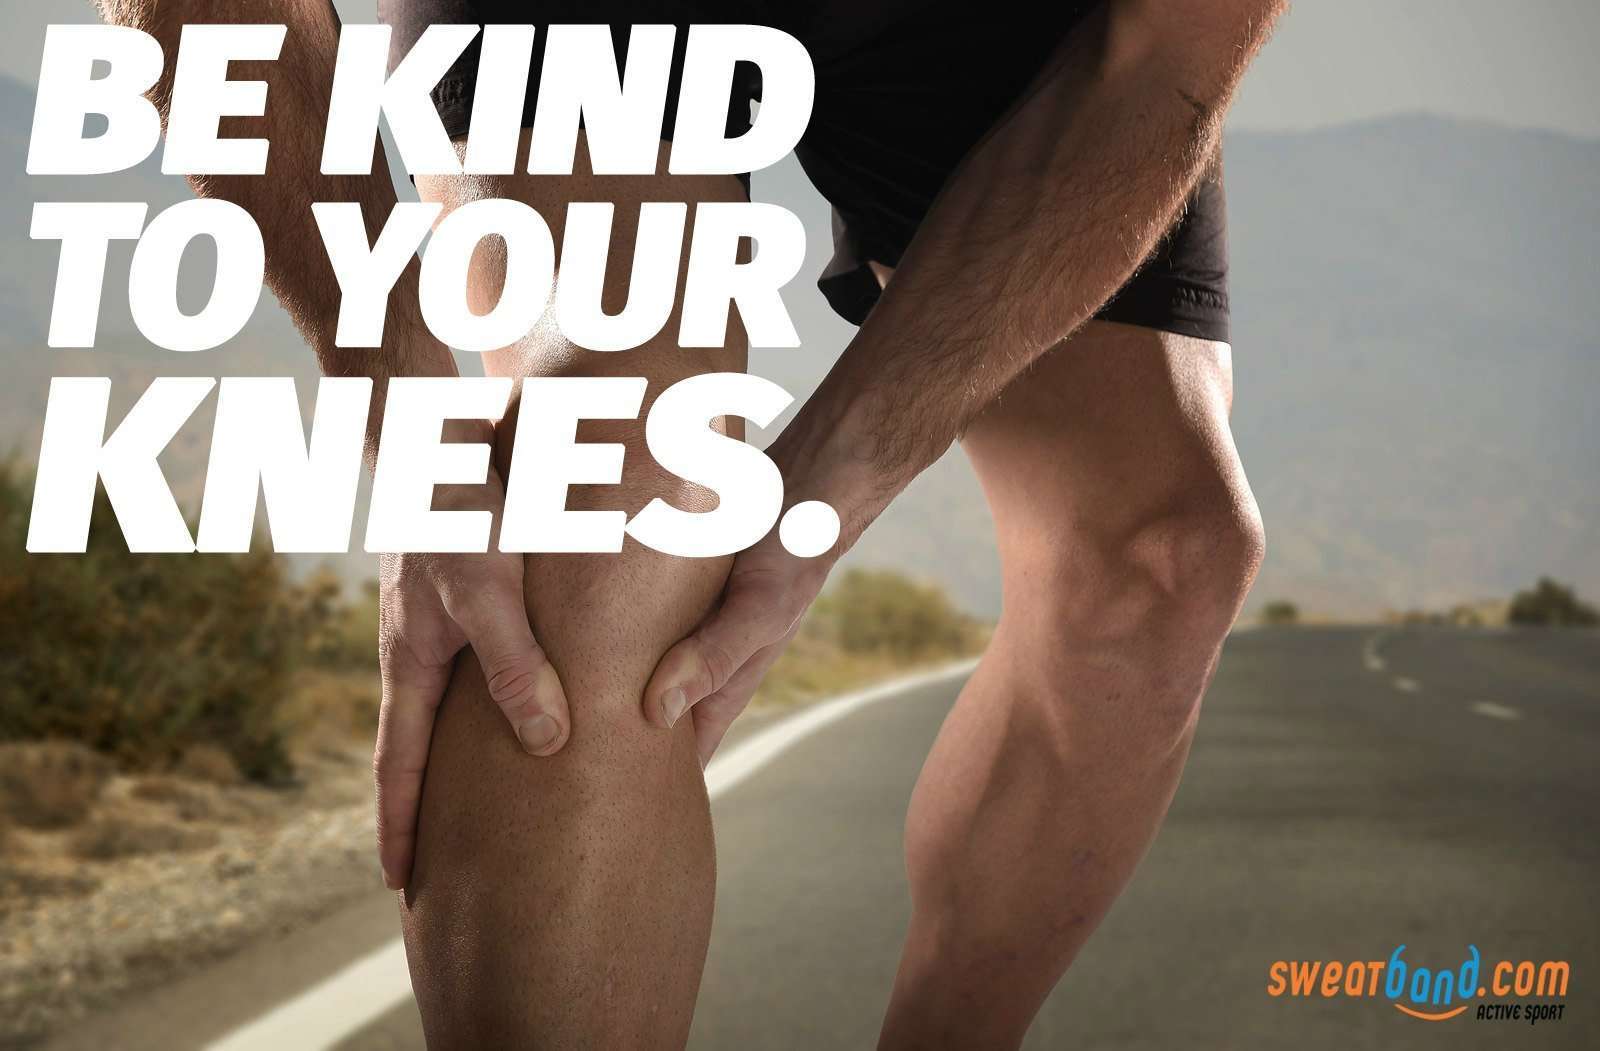 How To Prevent Knee Injury And Protect Your Knees